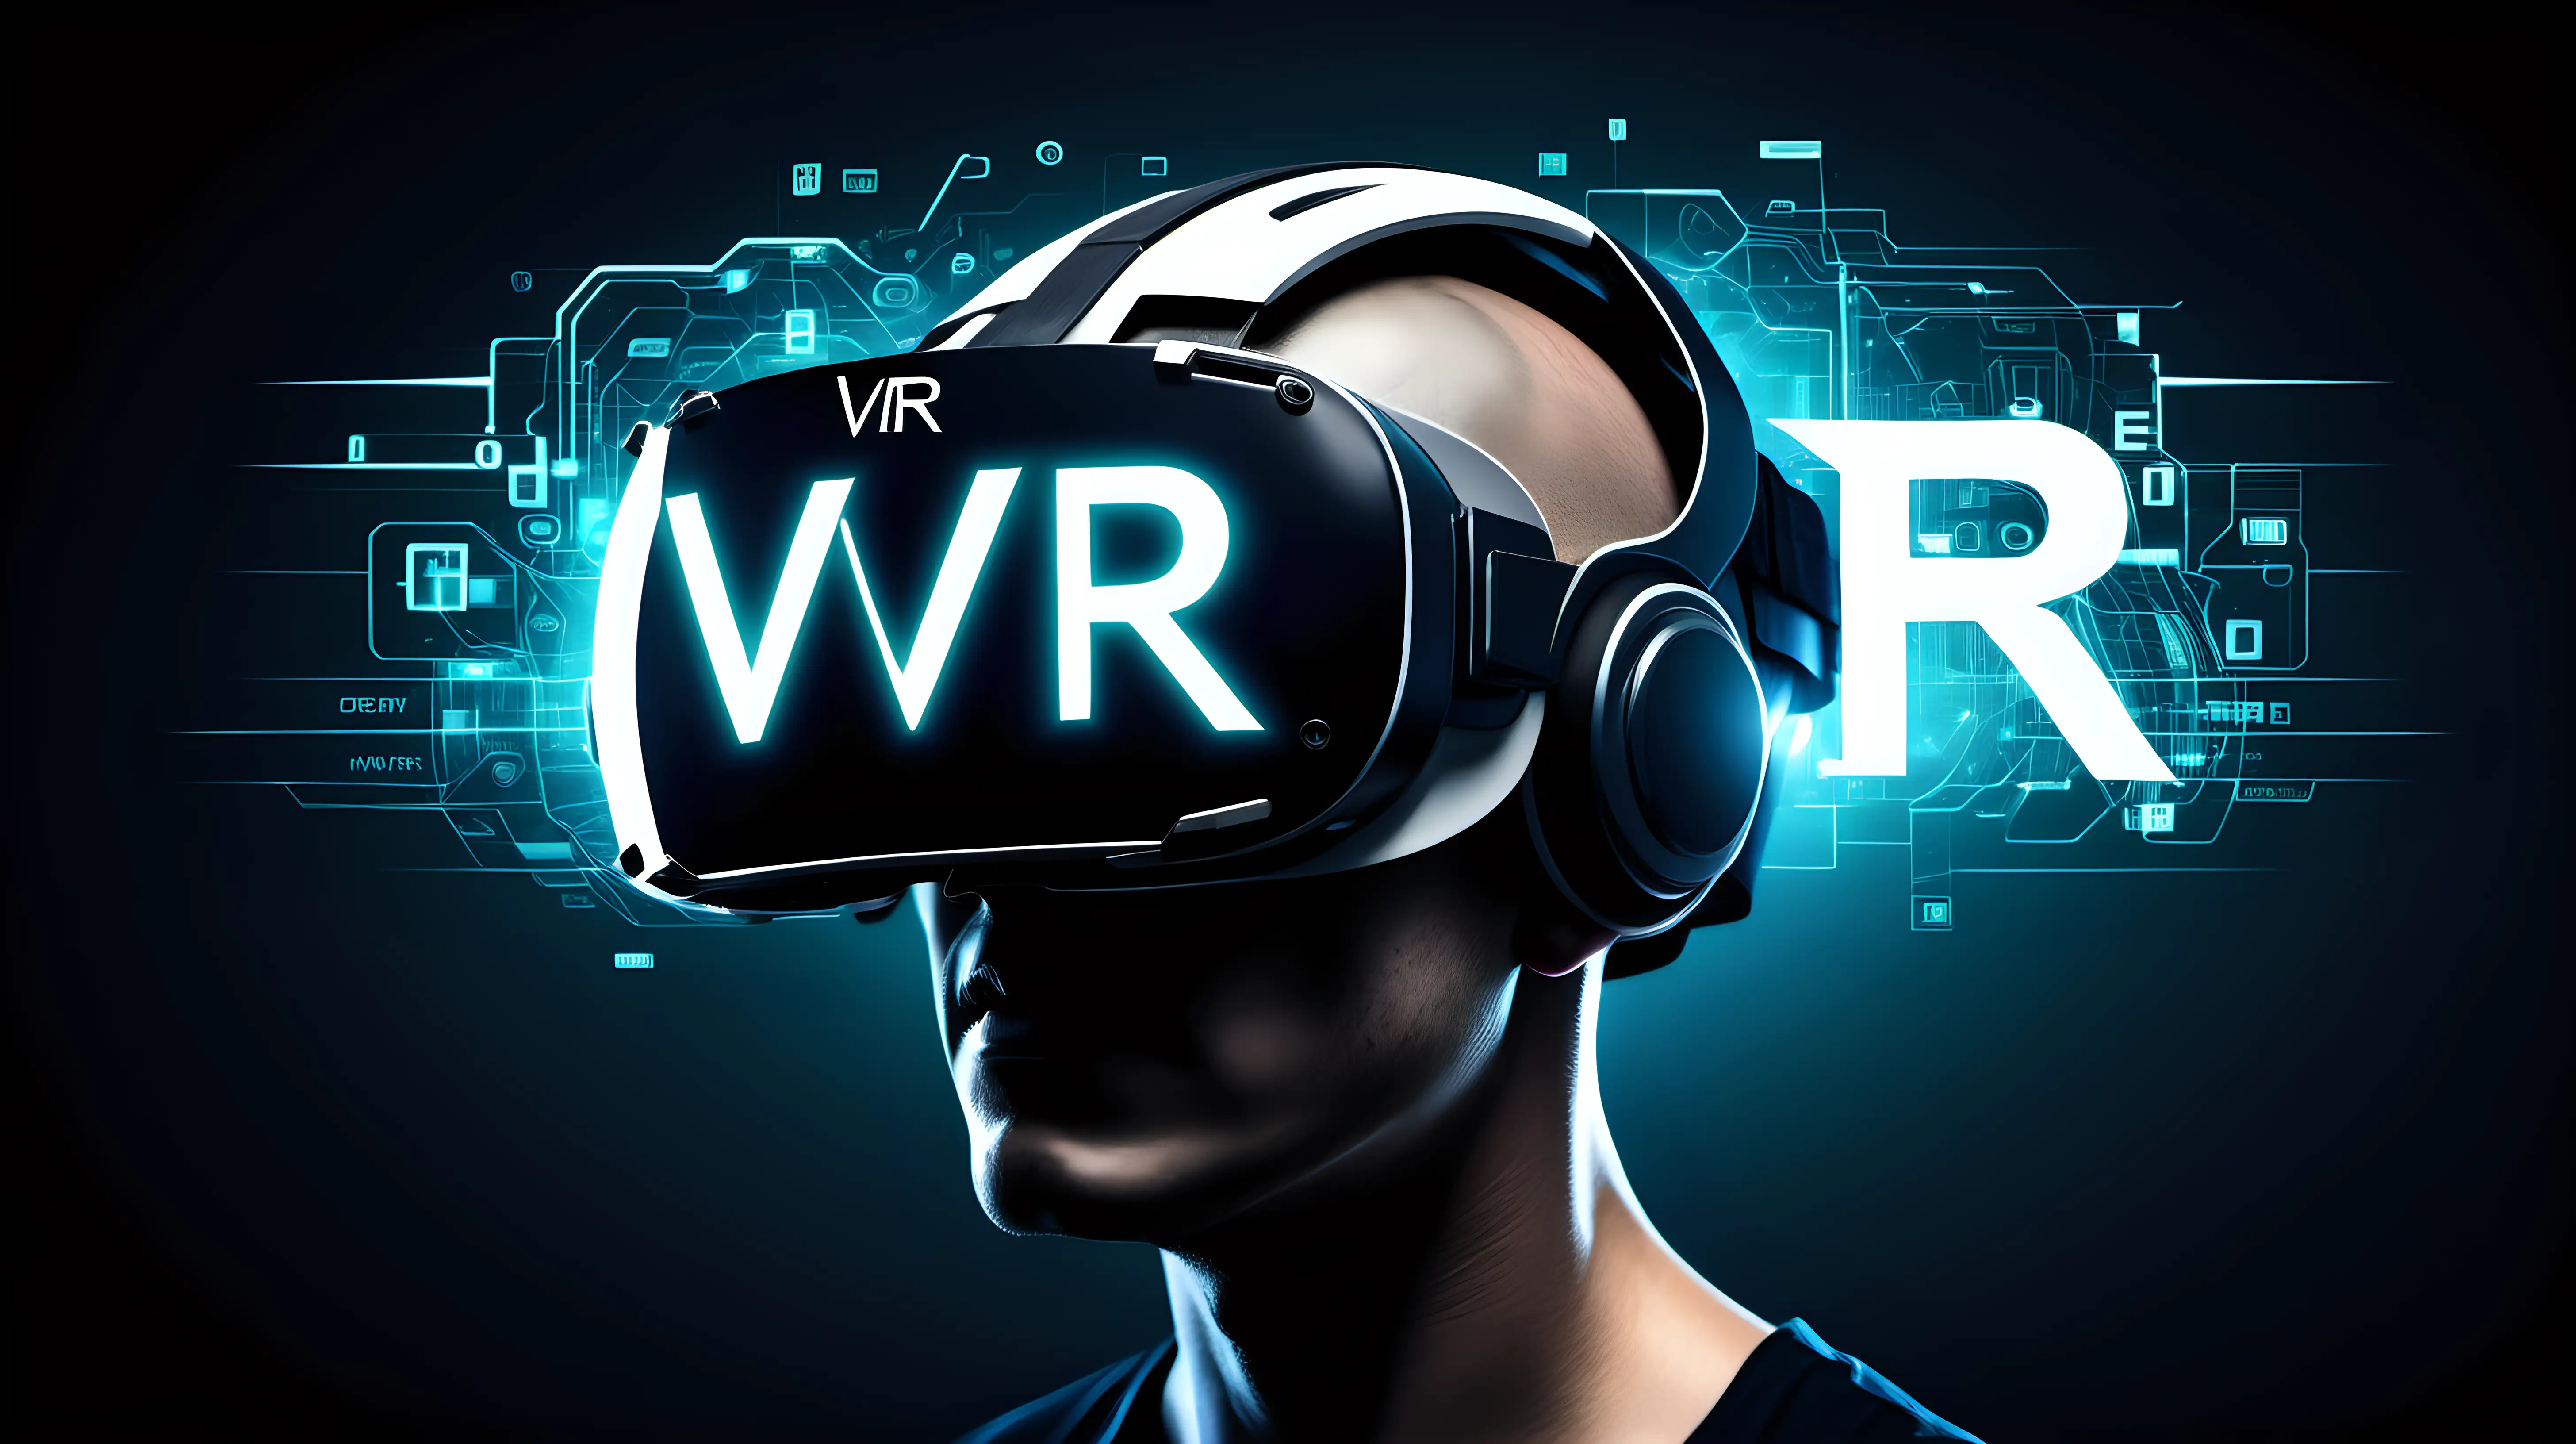 A digital interface displaying "VR" in futuristic fonts, integrated into a high-tech helmet worn by a cybernetic being, emphasizing the immersive nature of virtual reality experiences.